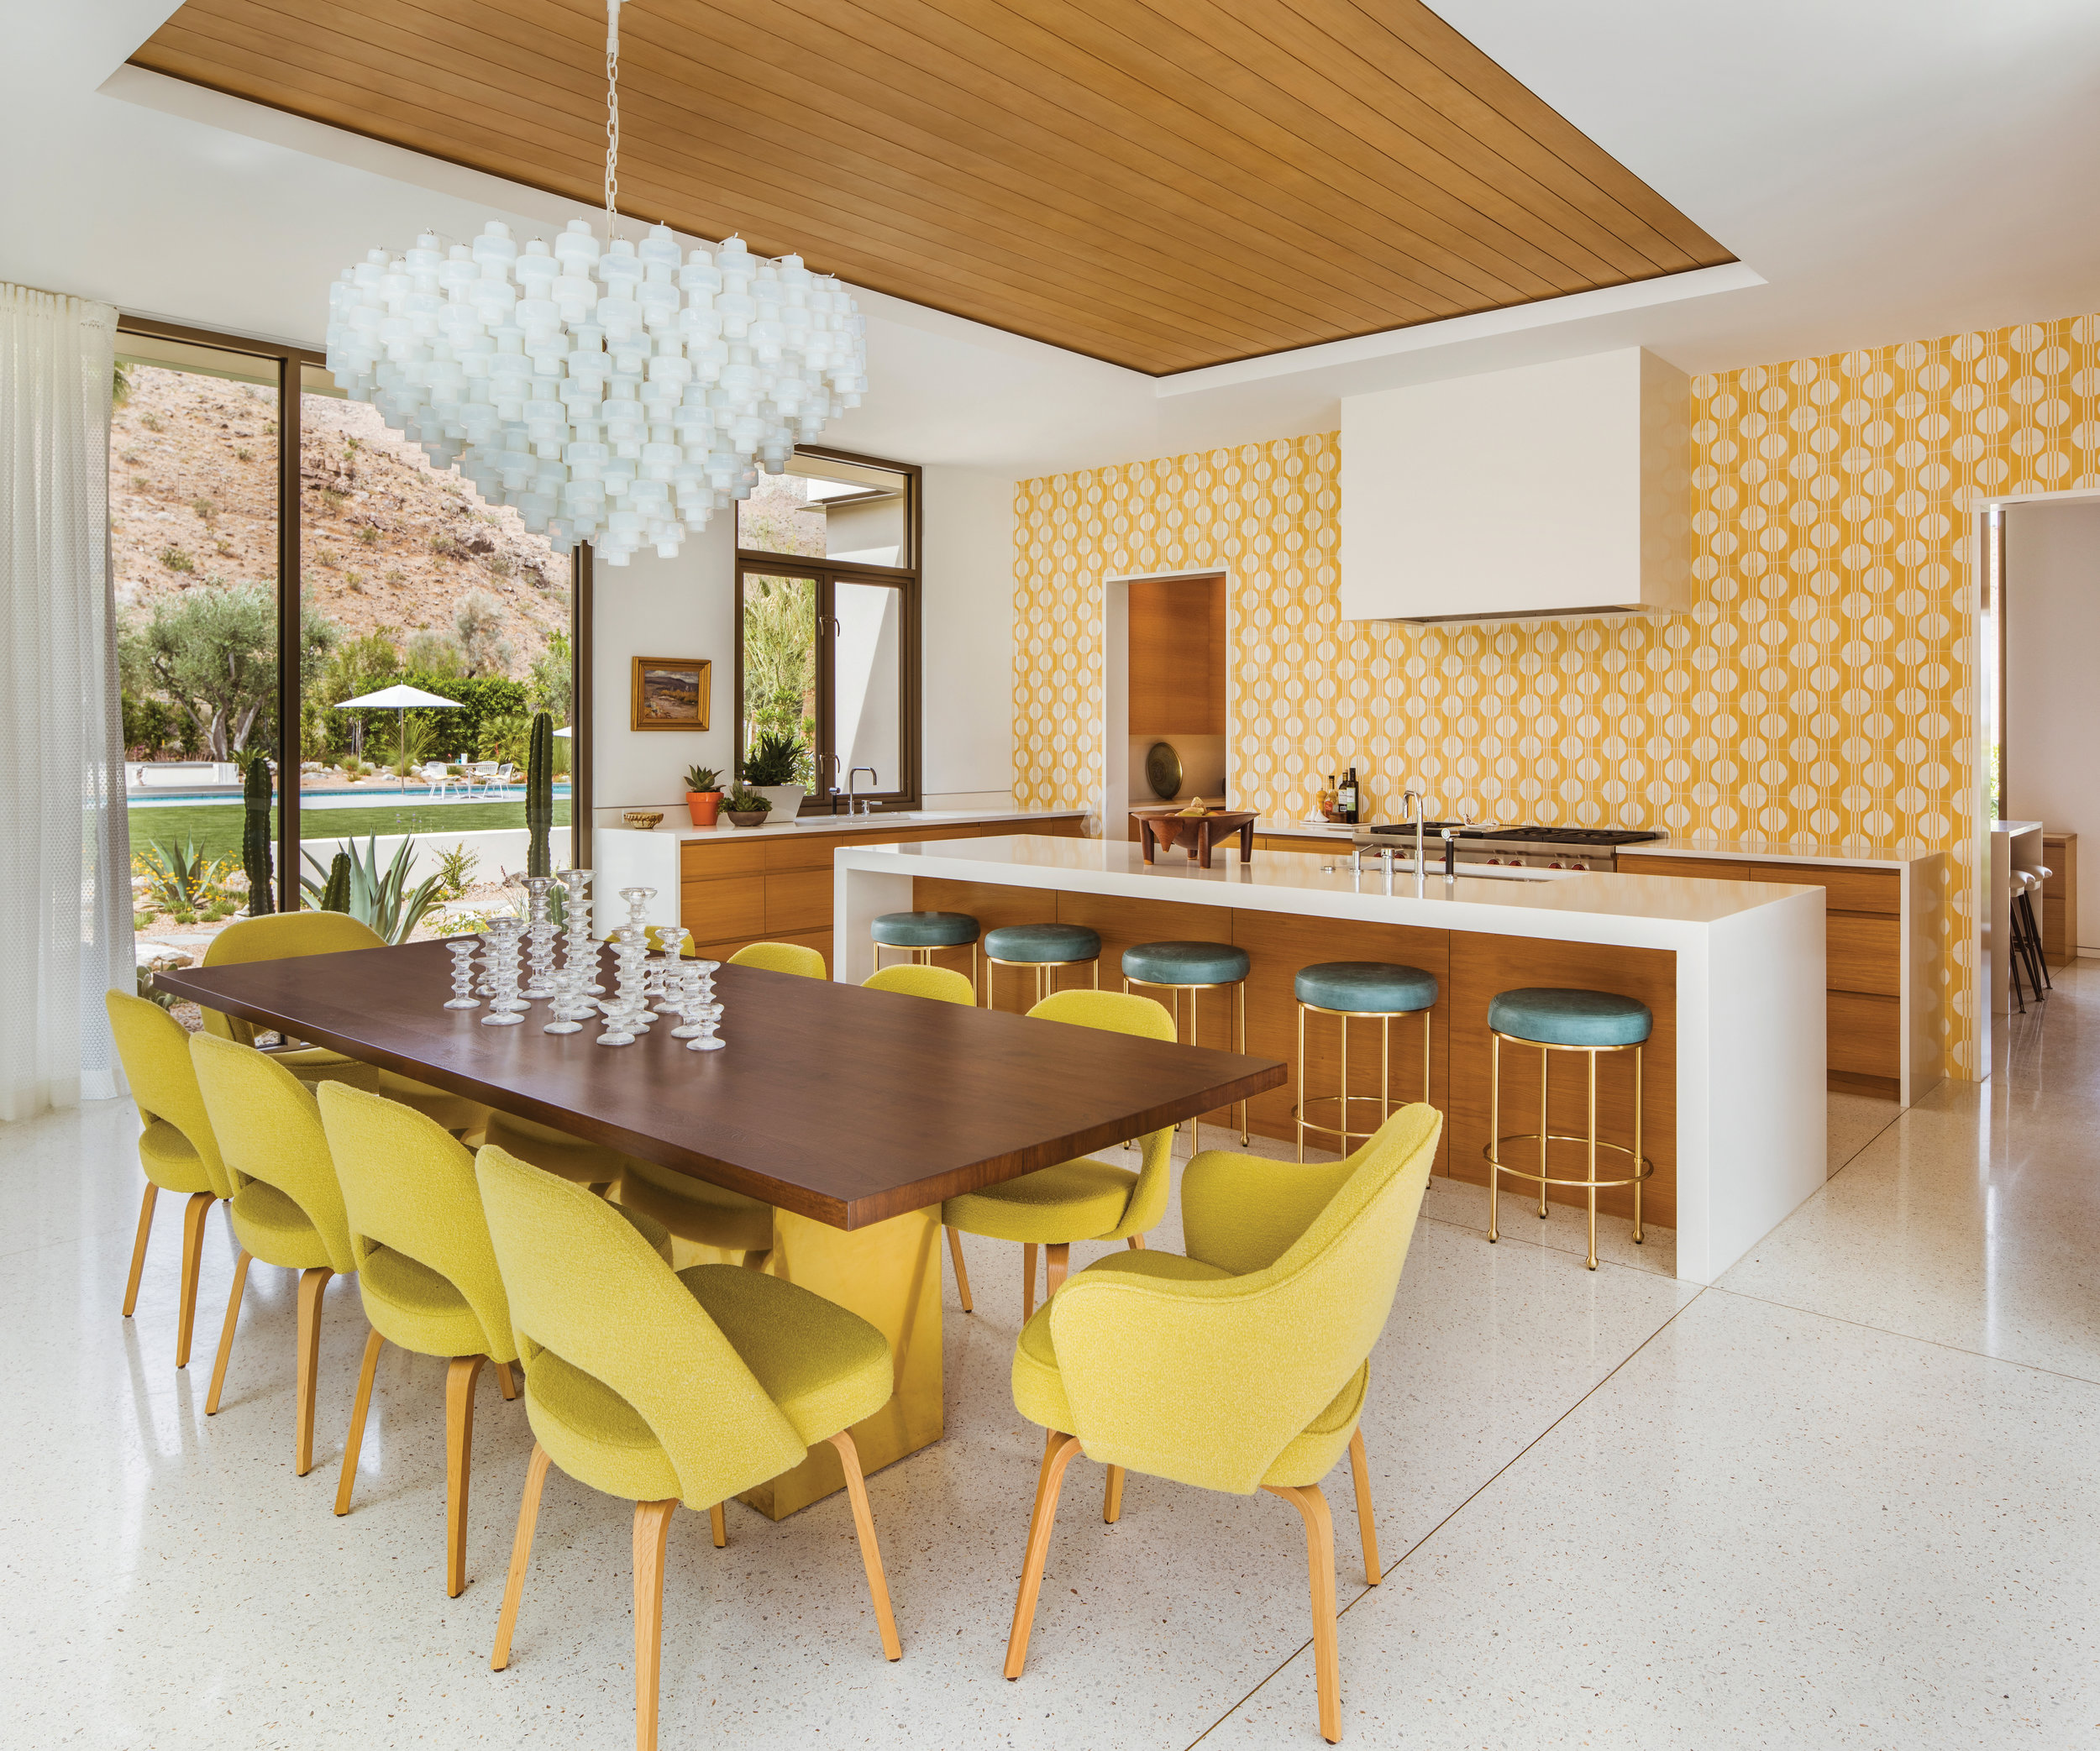  "Inside the front door, Nesen, working with her associate and lead designer Morgan Thomas and her former associate Lucy Roland, ramped up the color factor with furnishings and finishes. Perhaps most striking is a kitchen wall tiled in a hue called y